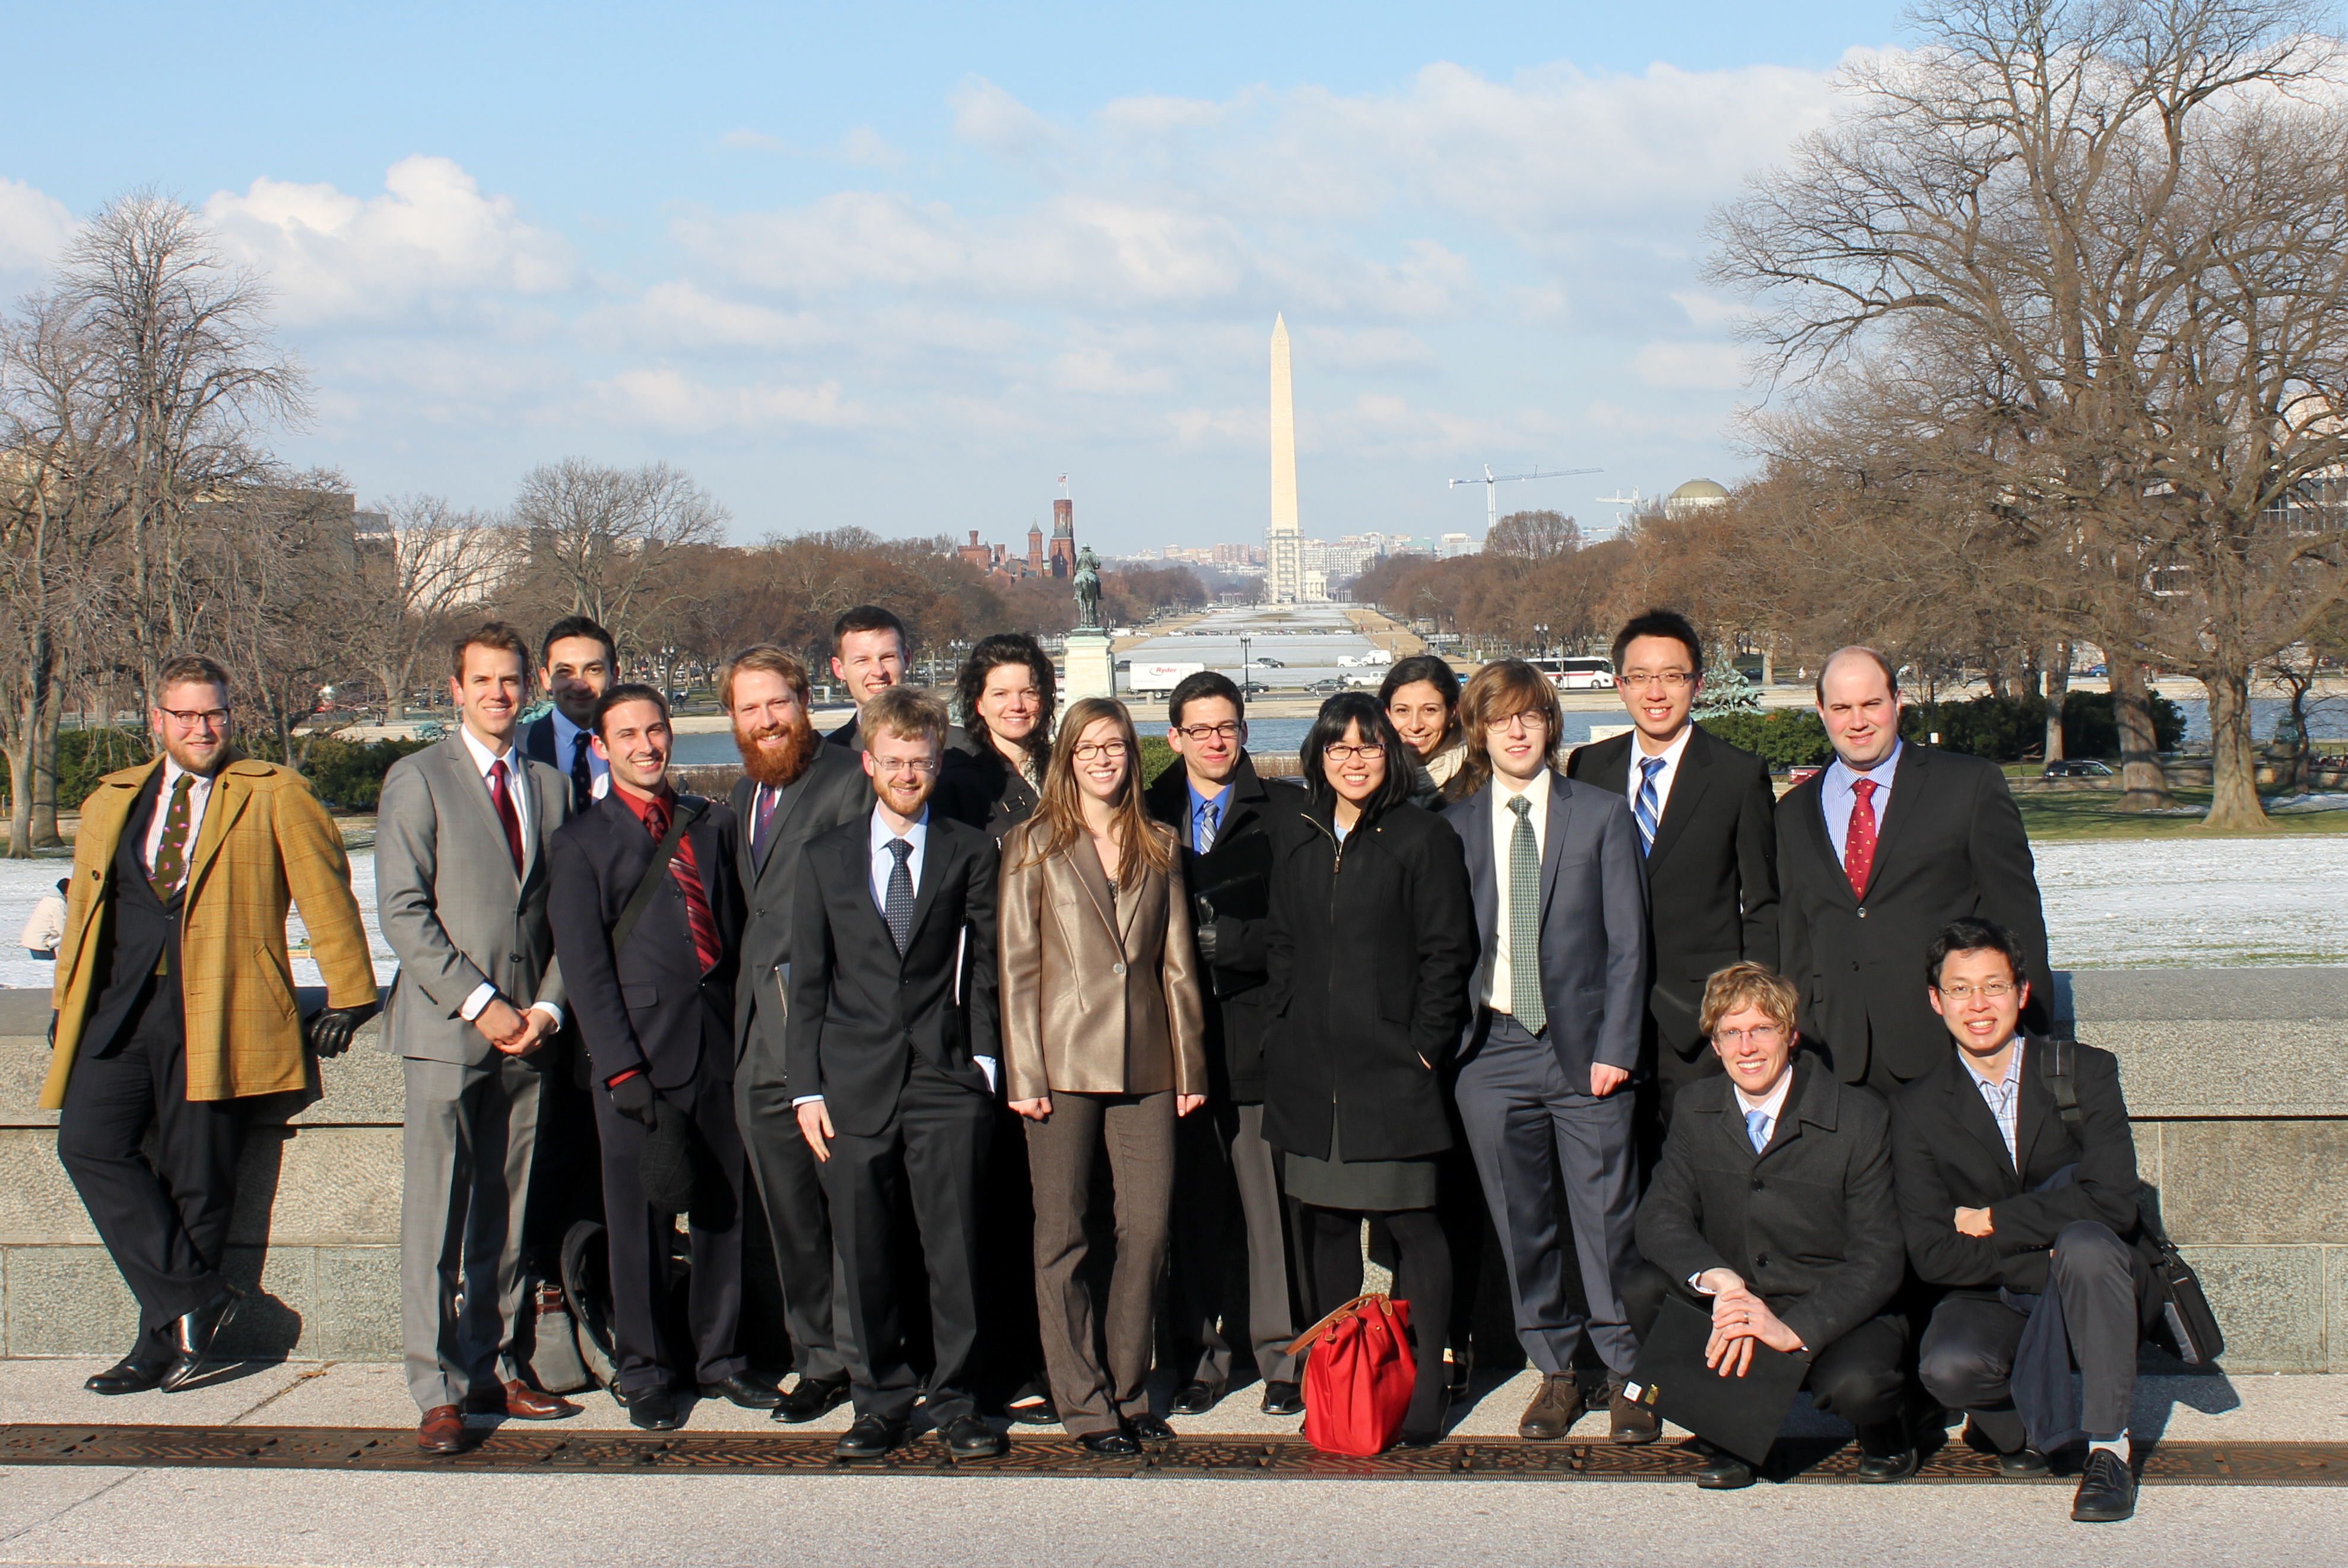 Dan Rothenberg (fourth from left) with MIT Science Policy Initiative students on the national mall, 2014. (Courtesy of MIT Science Policy Initiative)